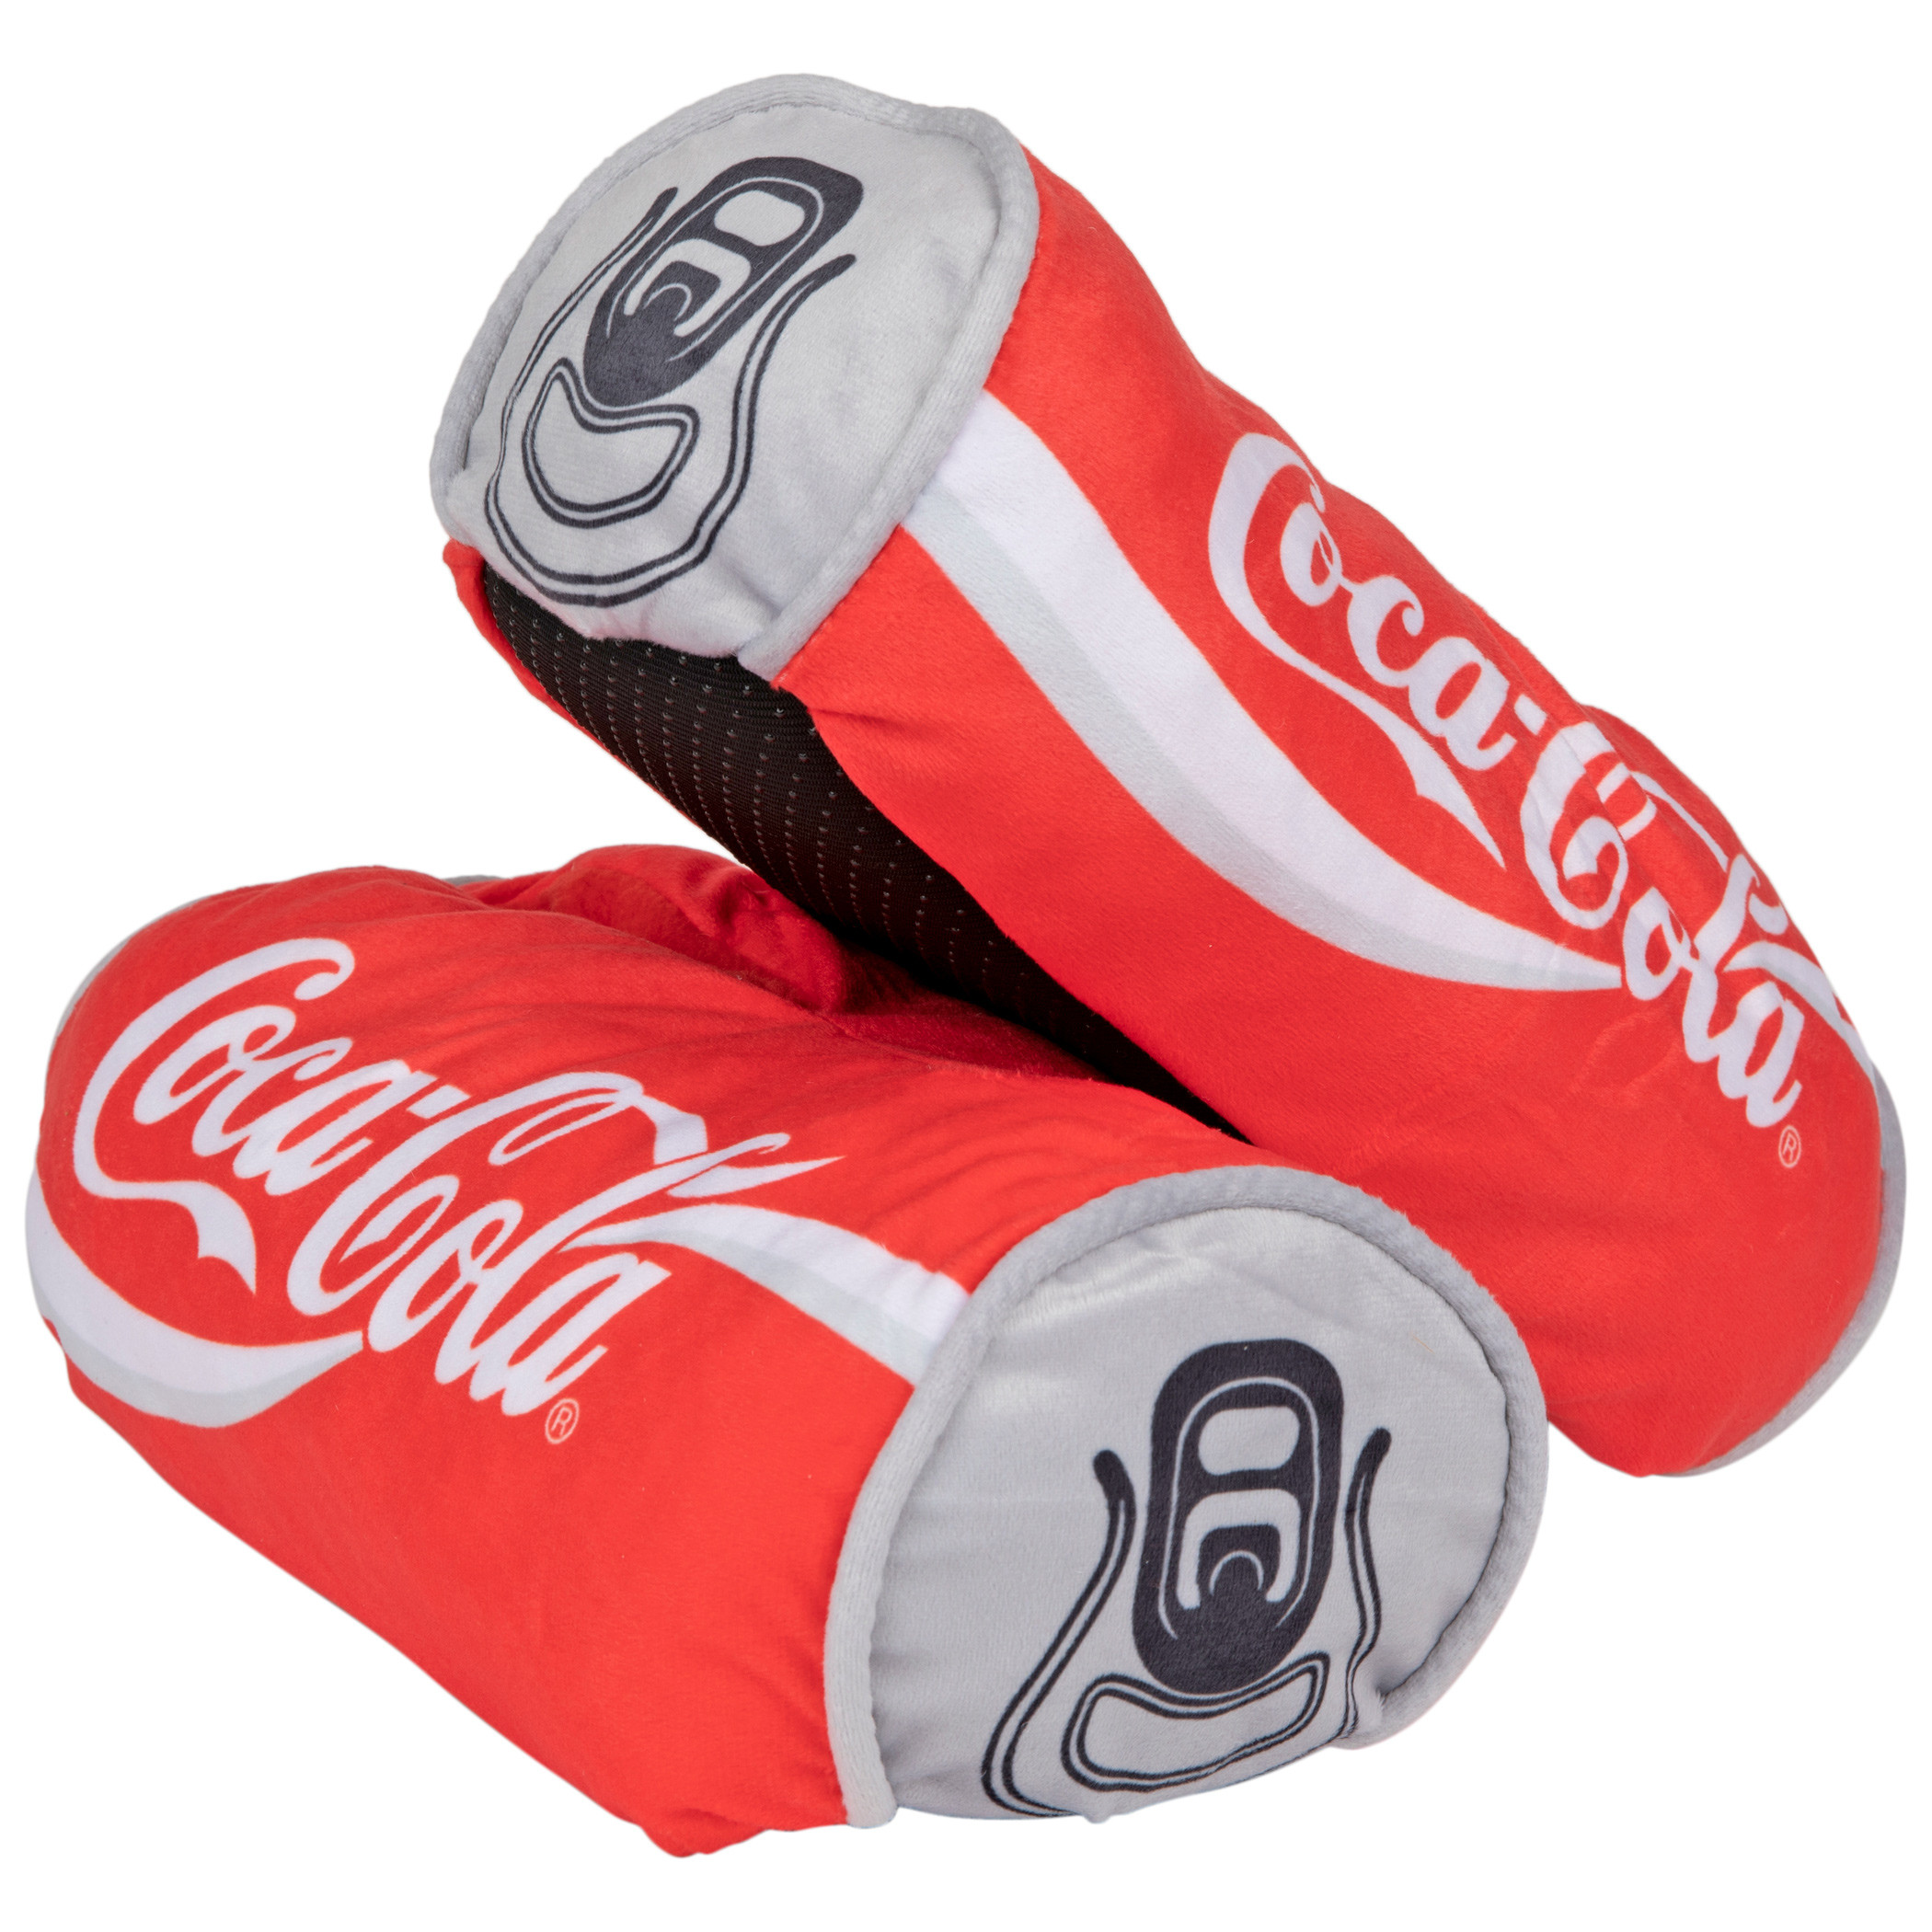 Coca-Cola Classic Can Shaped Slippers